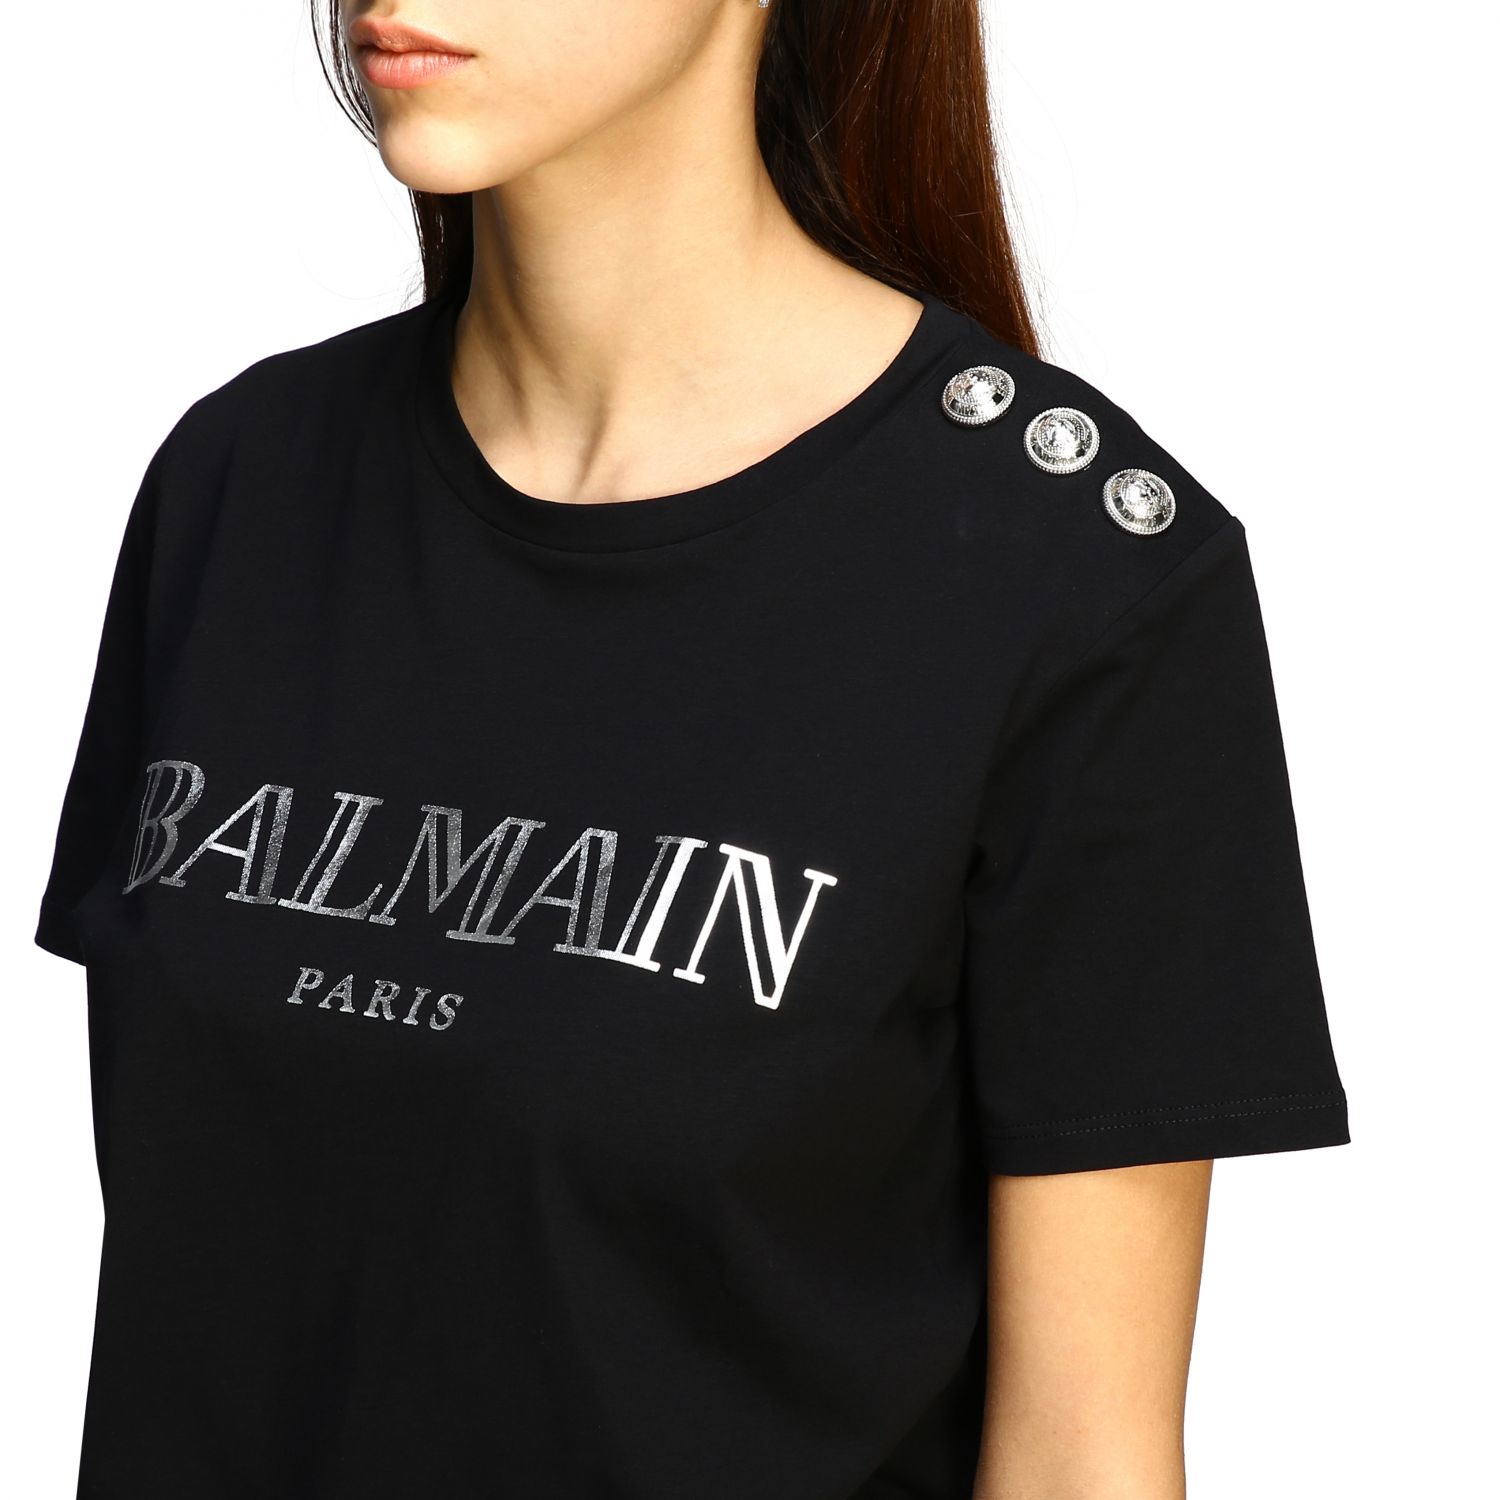 Buy > balmain t shirt with buttons > in stock